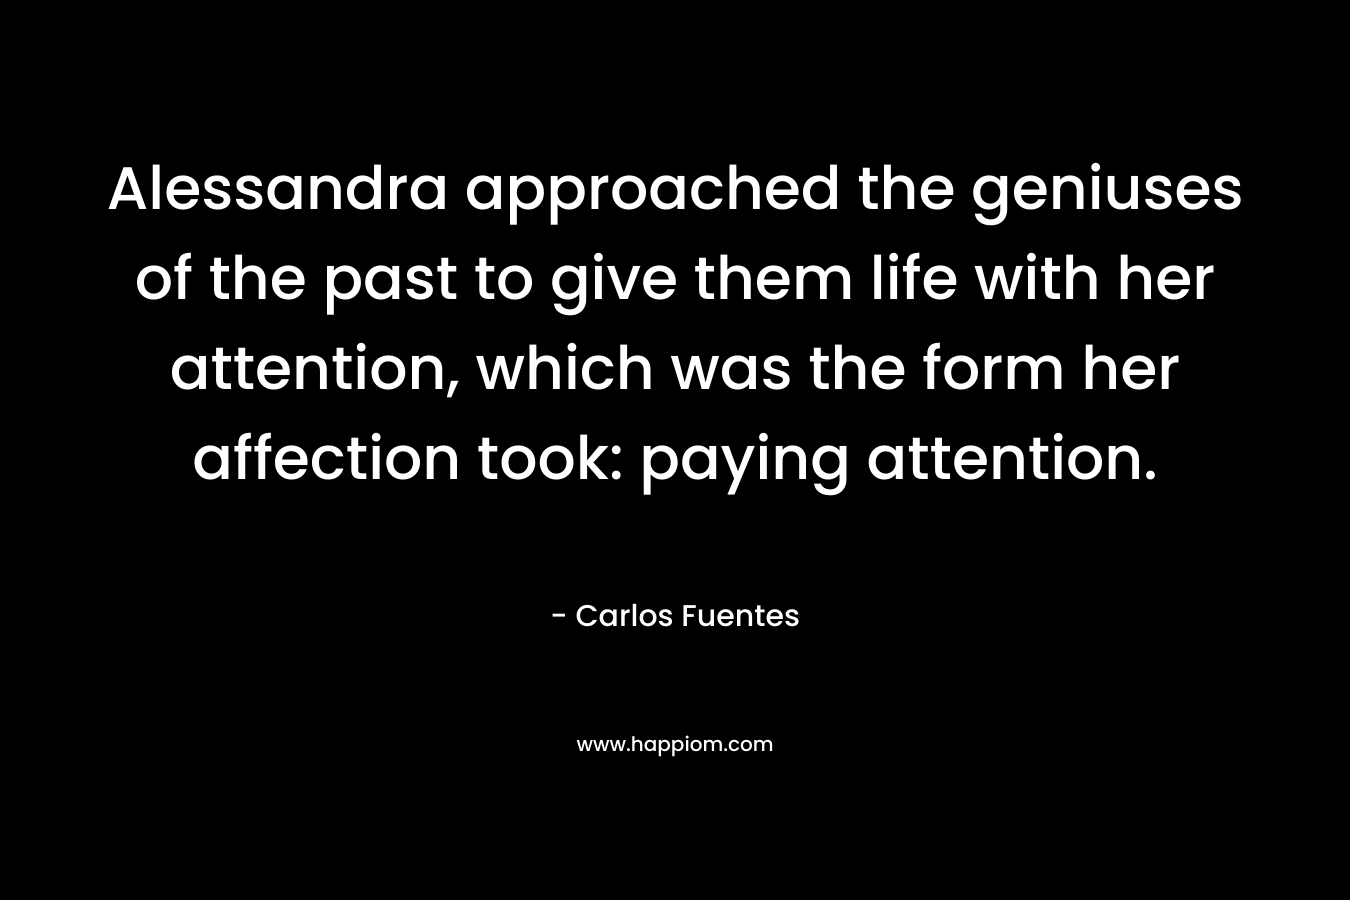 Alessandra approached the geniuses of the past to give them life with her attention, which was the form her affection took: paying attention. – Carlos Fuentes